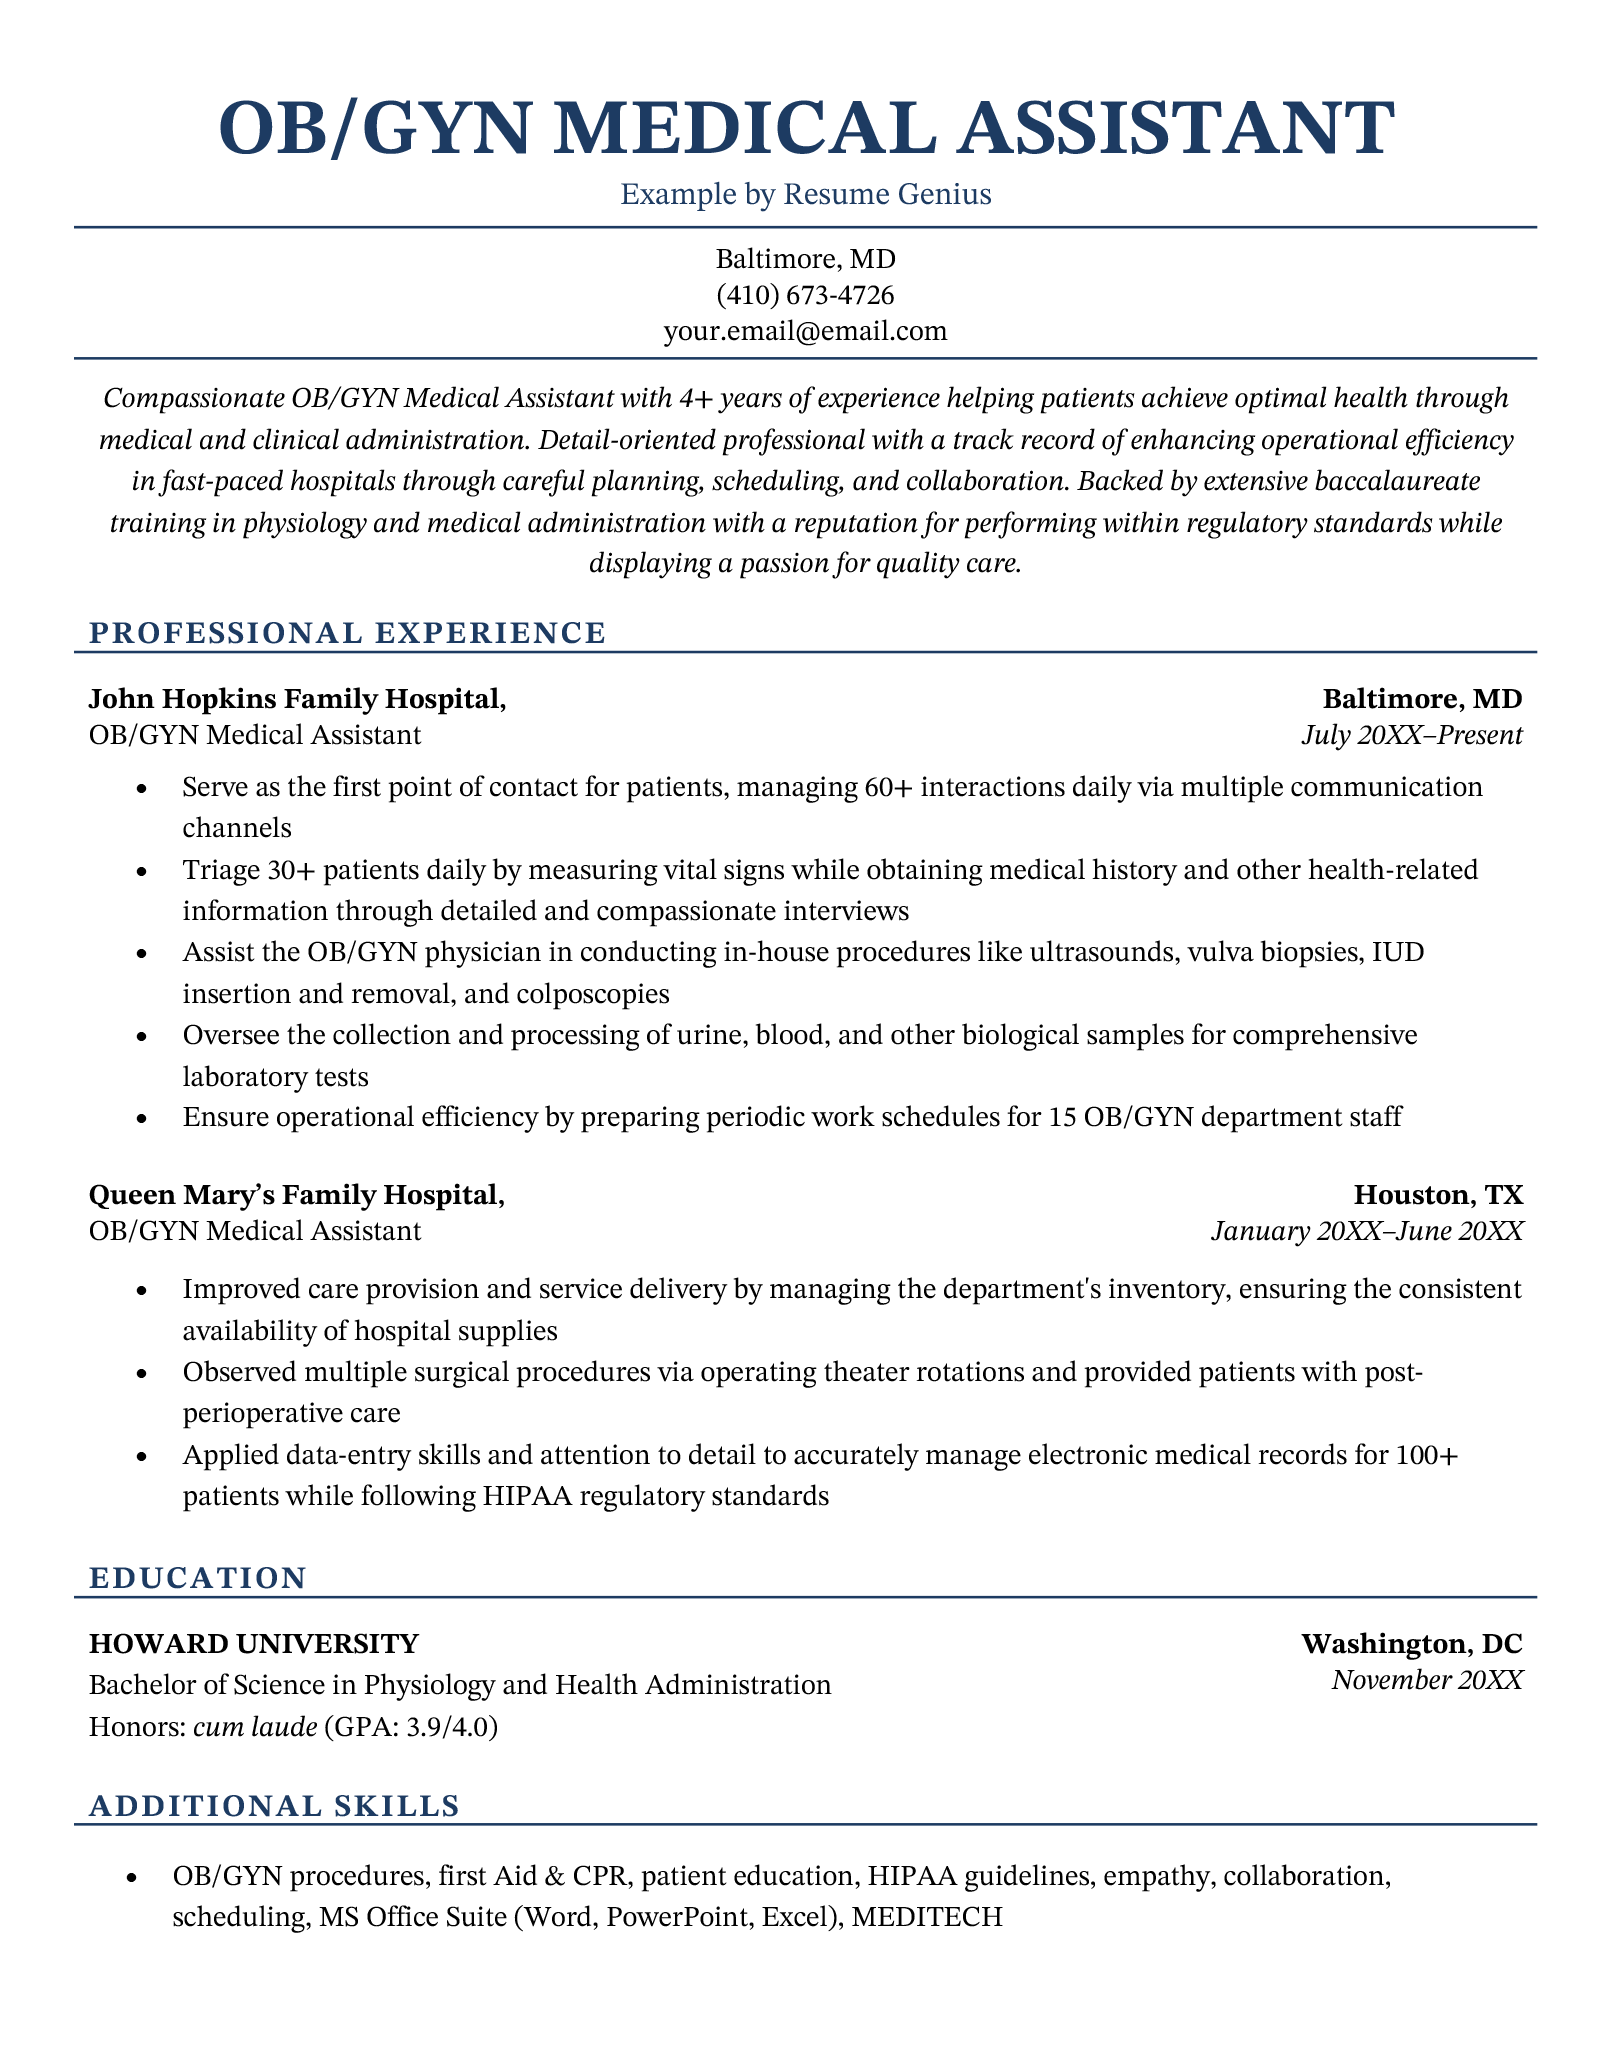 A professional-looking OB/GYN medical assistant resume example using a clean layout and with the header, experience section, education section, and additional skills section each highlighted in dark blue